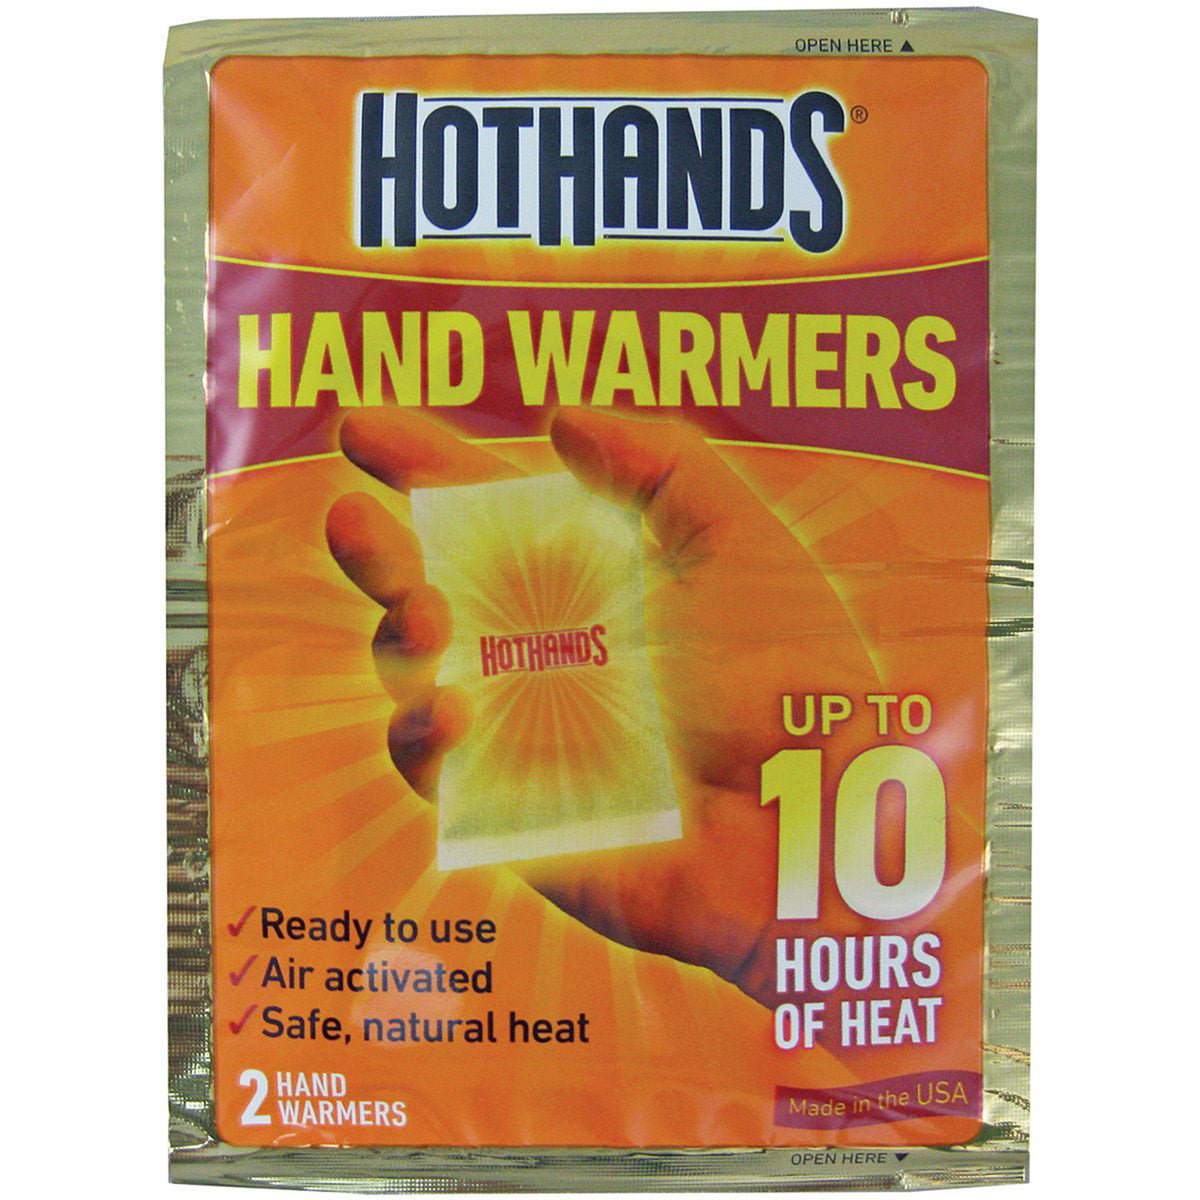 a 2 pack of handwarmers